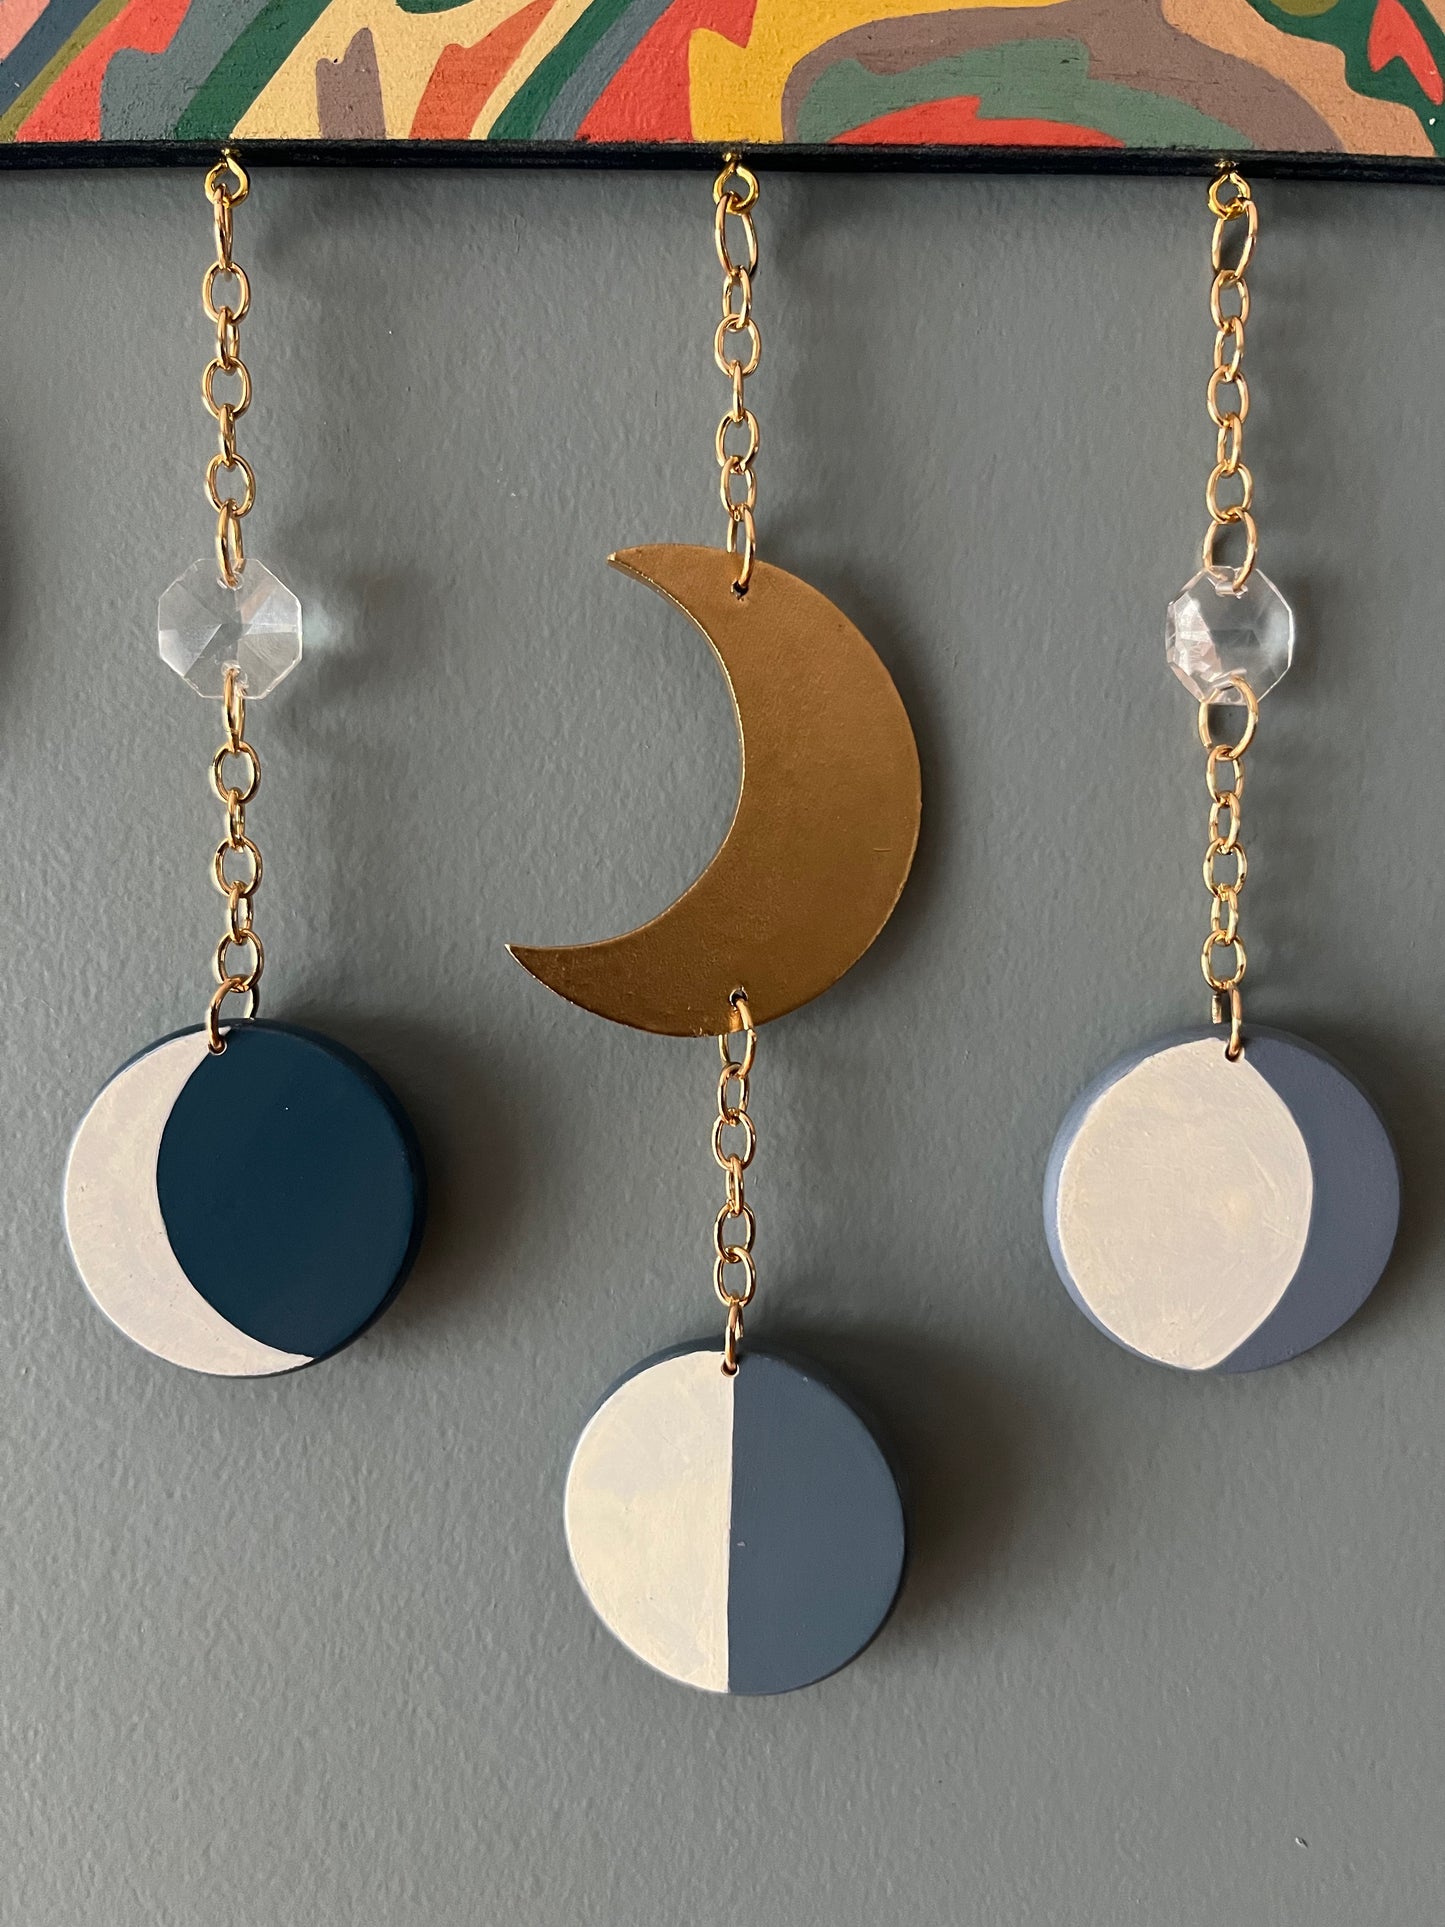 Hand painted wooden moon phase & chain hanger with sun catcher charms Decor from GemCadet